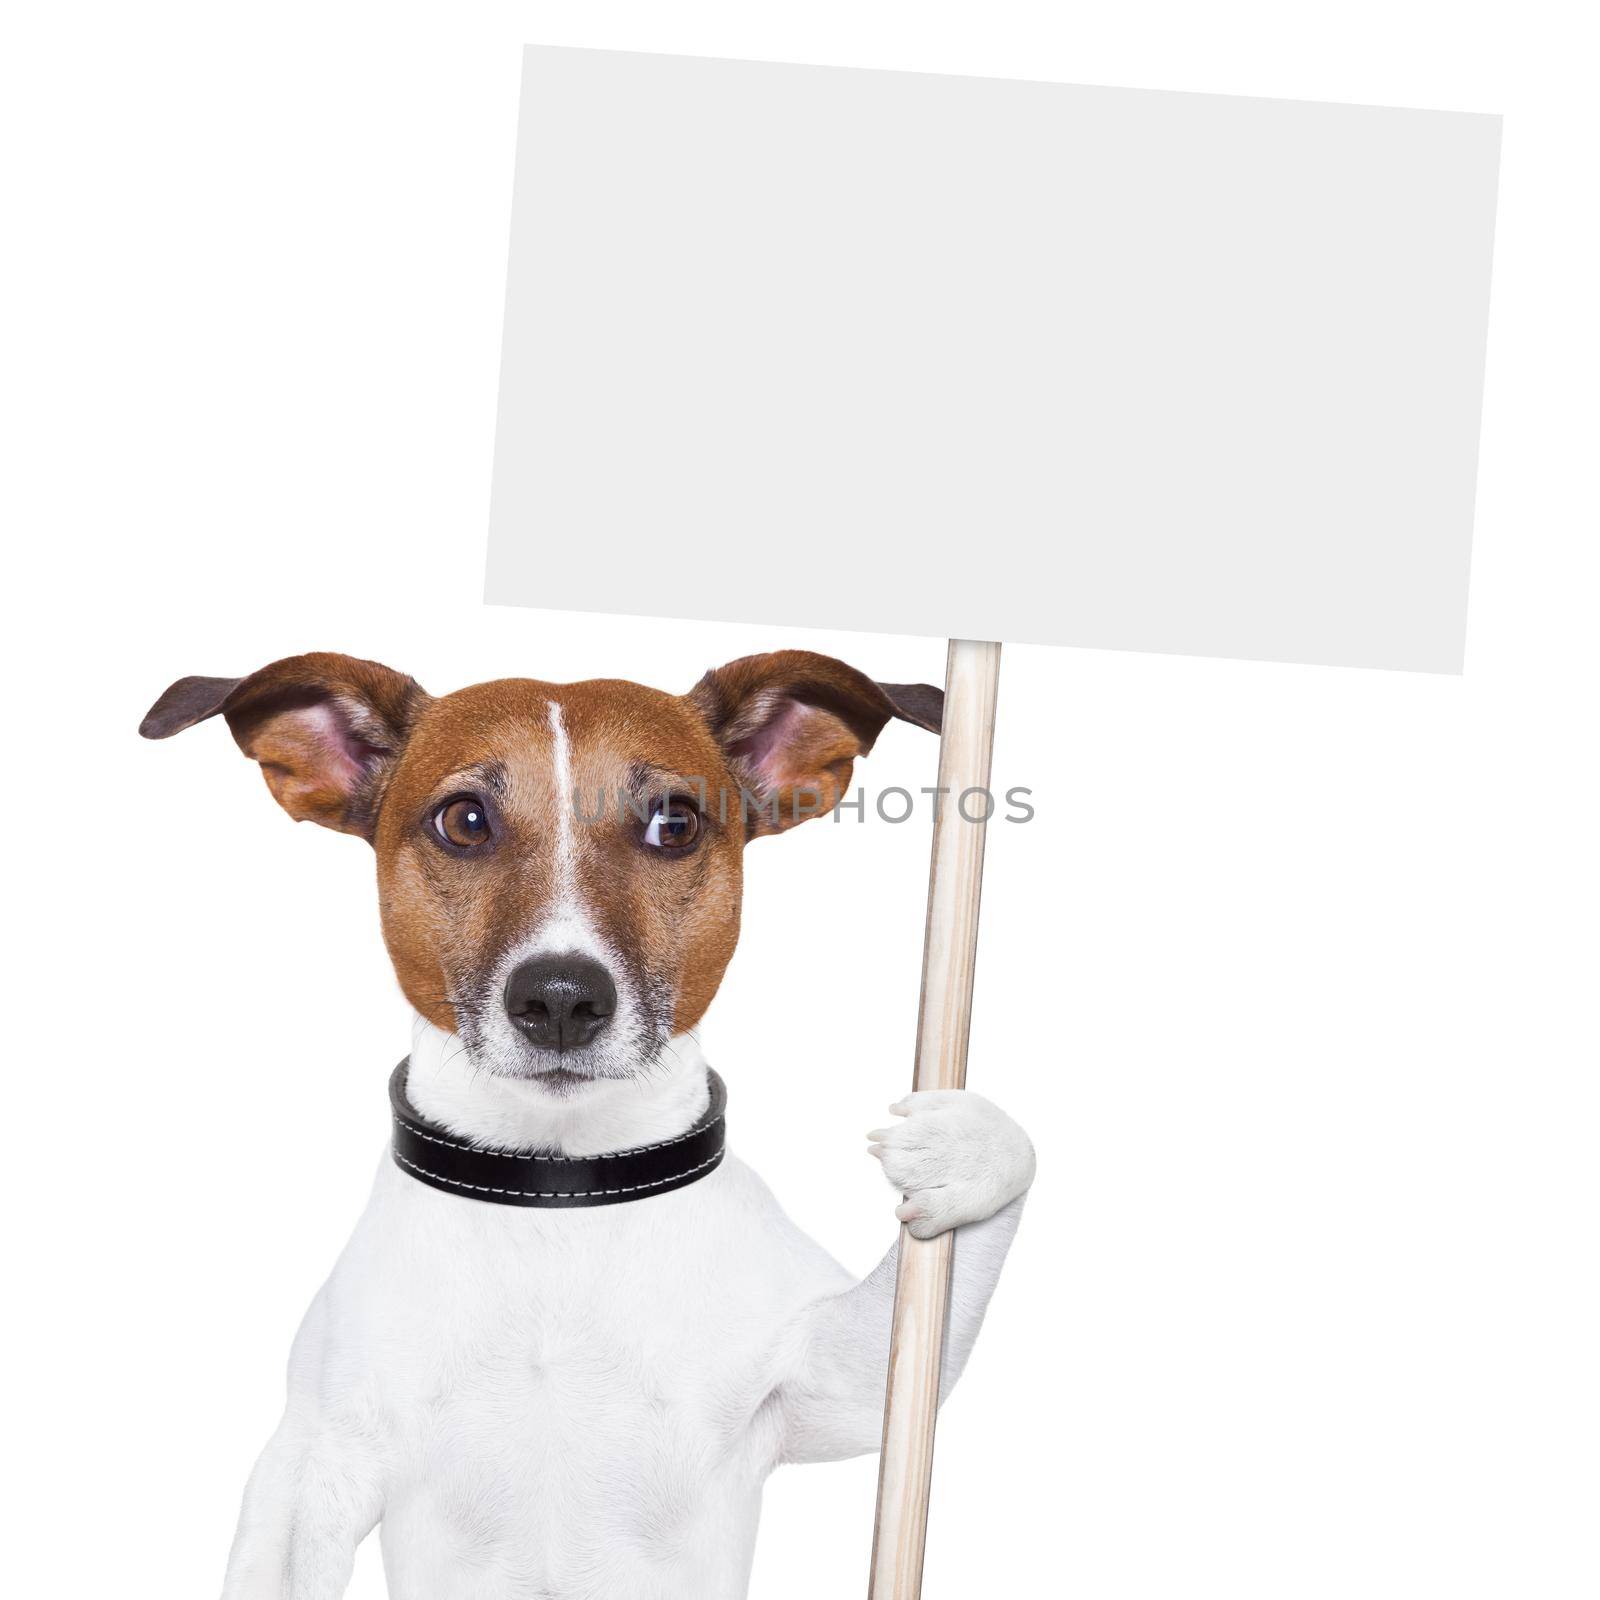 dog holding an empty placard and looking sideways